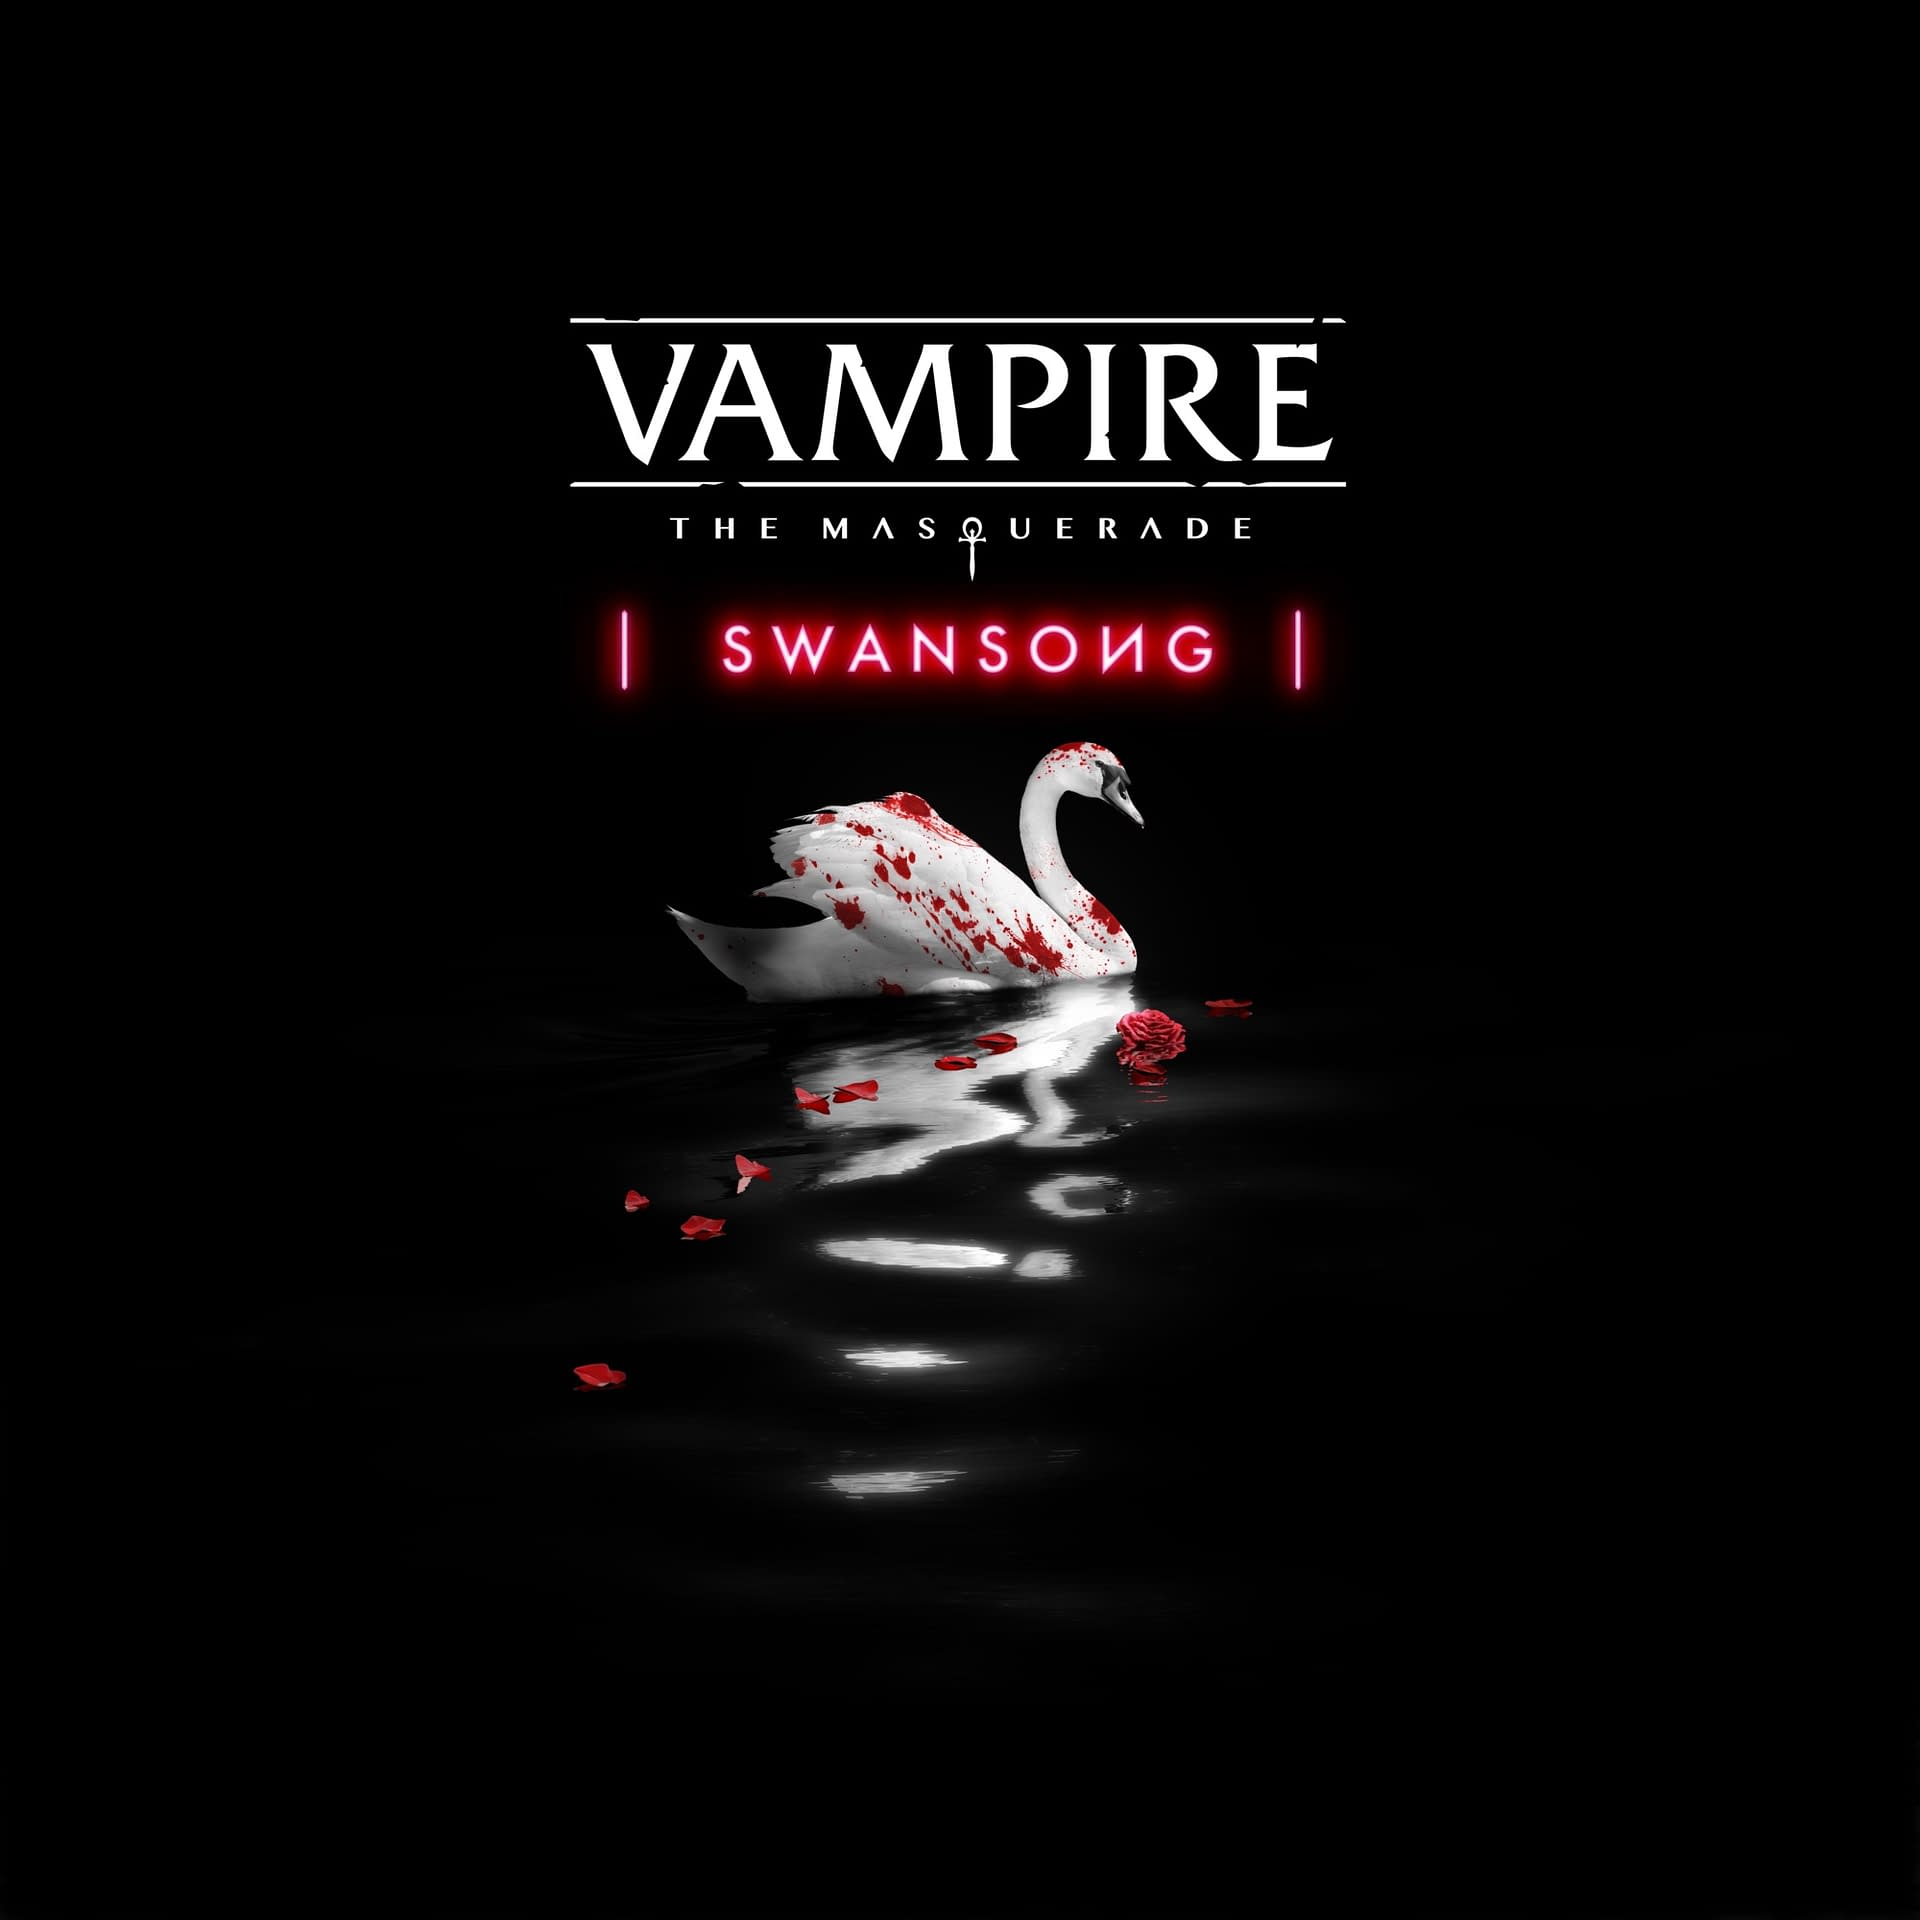 Vampire: The Masquerade - Swansong is a narrative RPG based on the